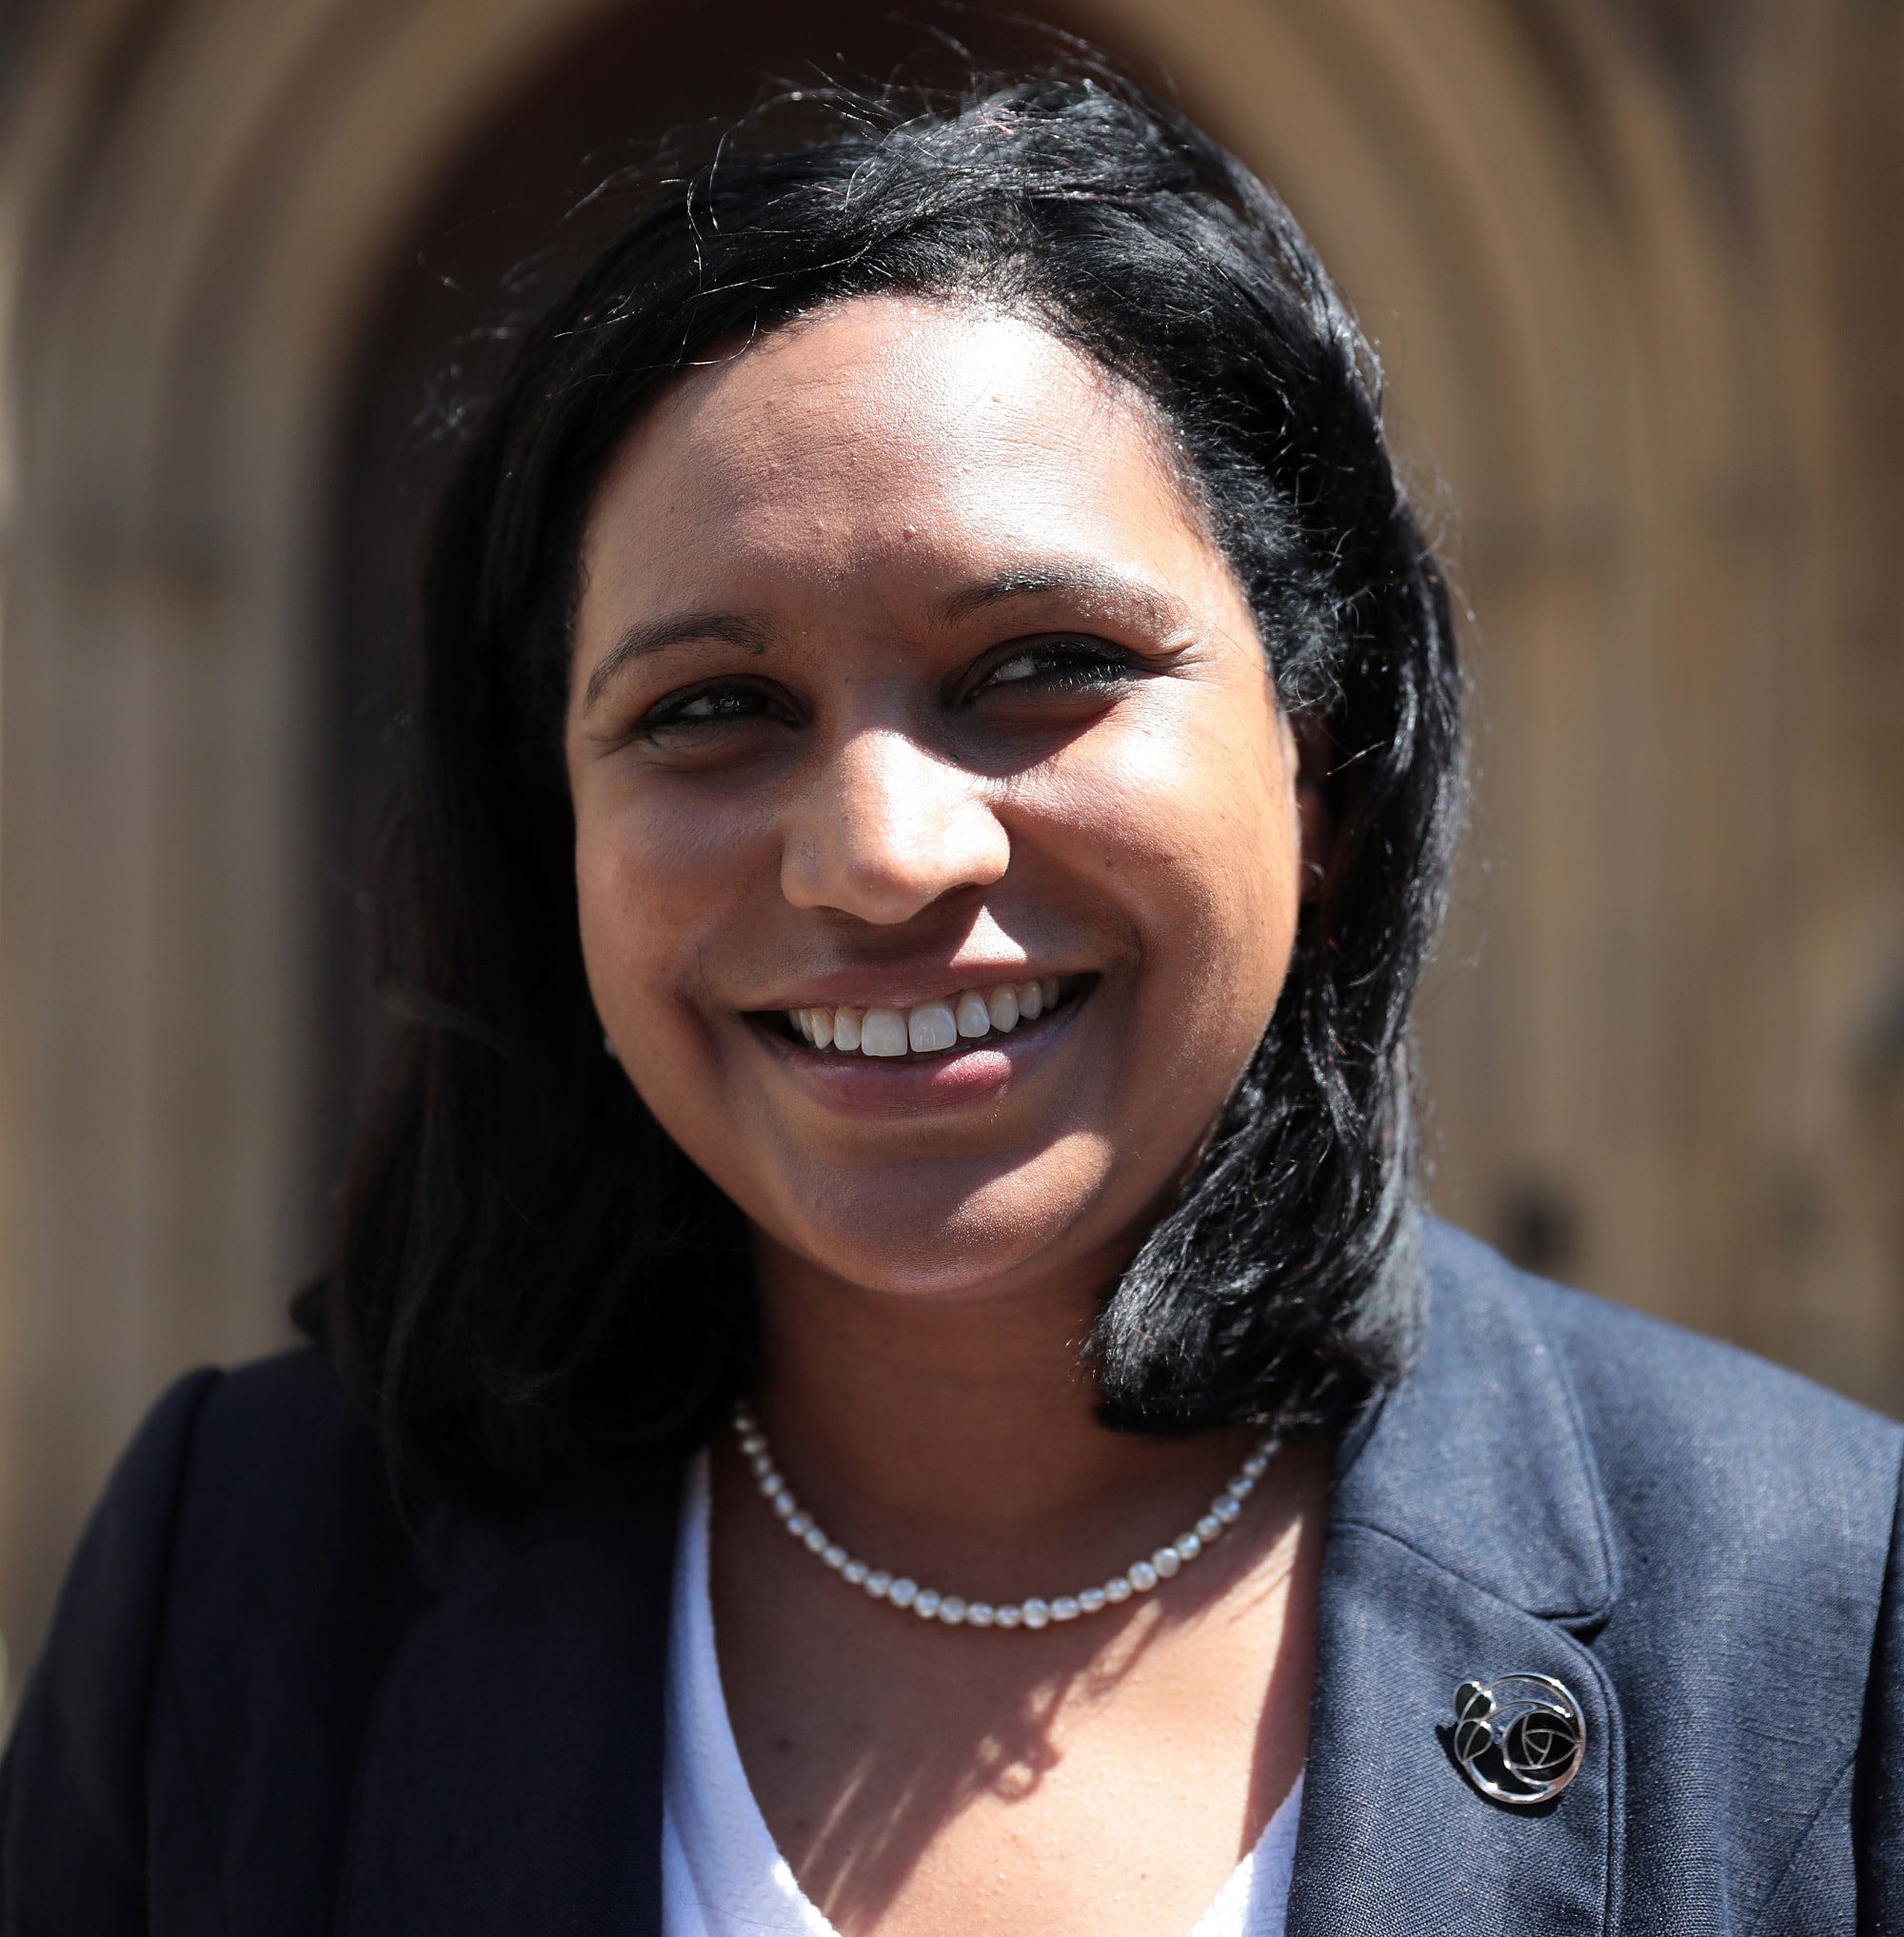 Labour shadow minister Janet Daby has resigned from the party's frontbench